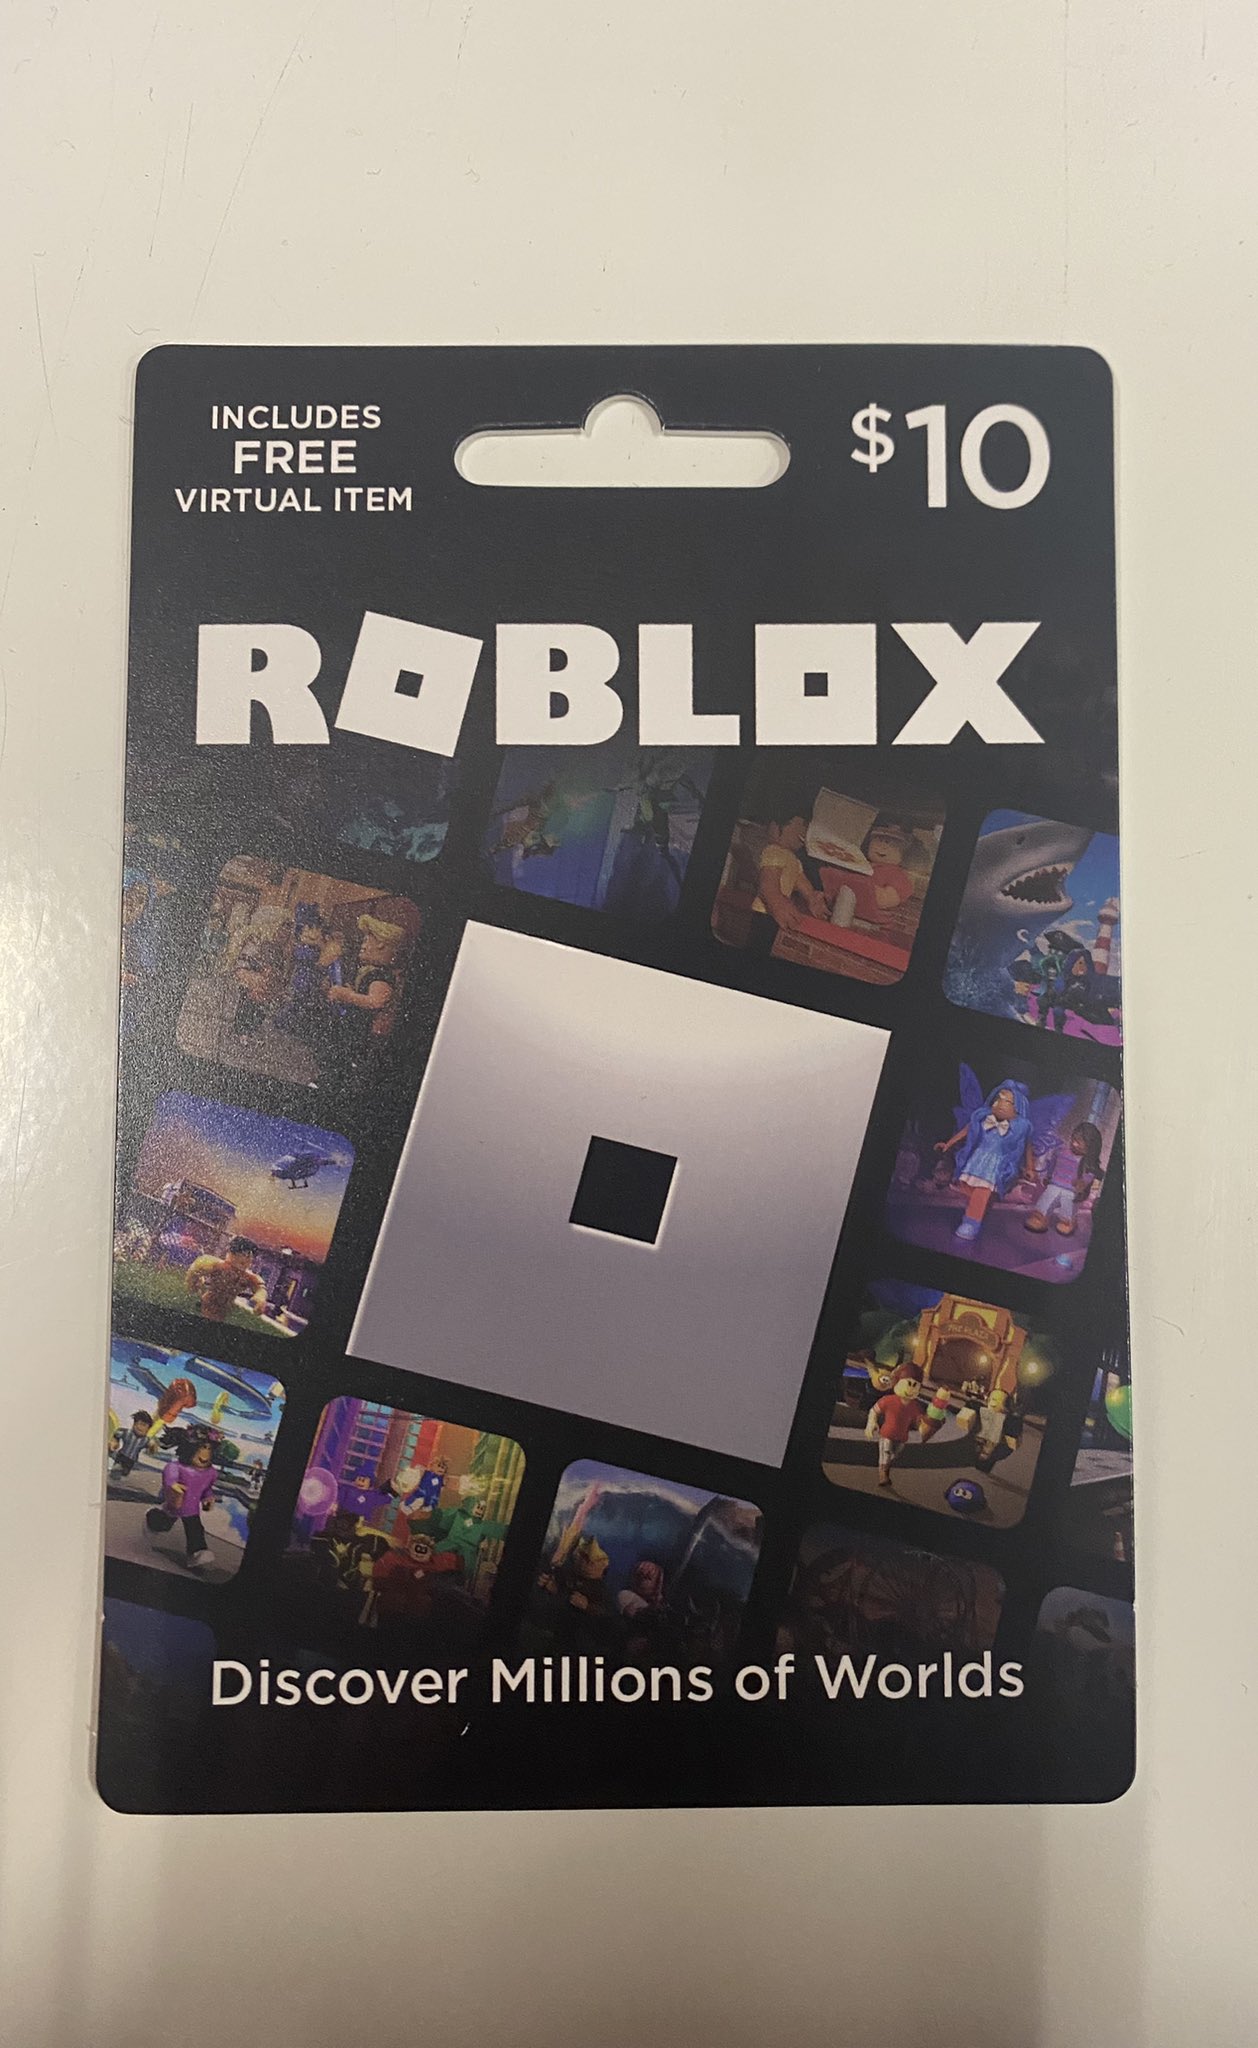 MOBY on X: 1 ROBUX GIVEAWAY (very real) 1️⃣LIKE, FOLLOW, AND RETWEET TO  ENTER 🥶😱 2️⃣ Reply with your Roblox username  / X